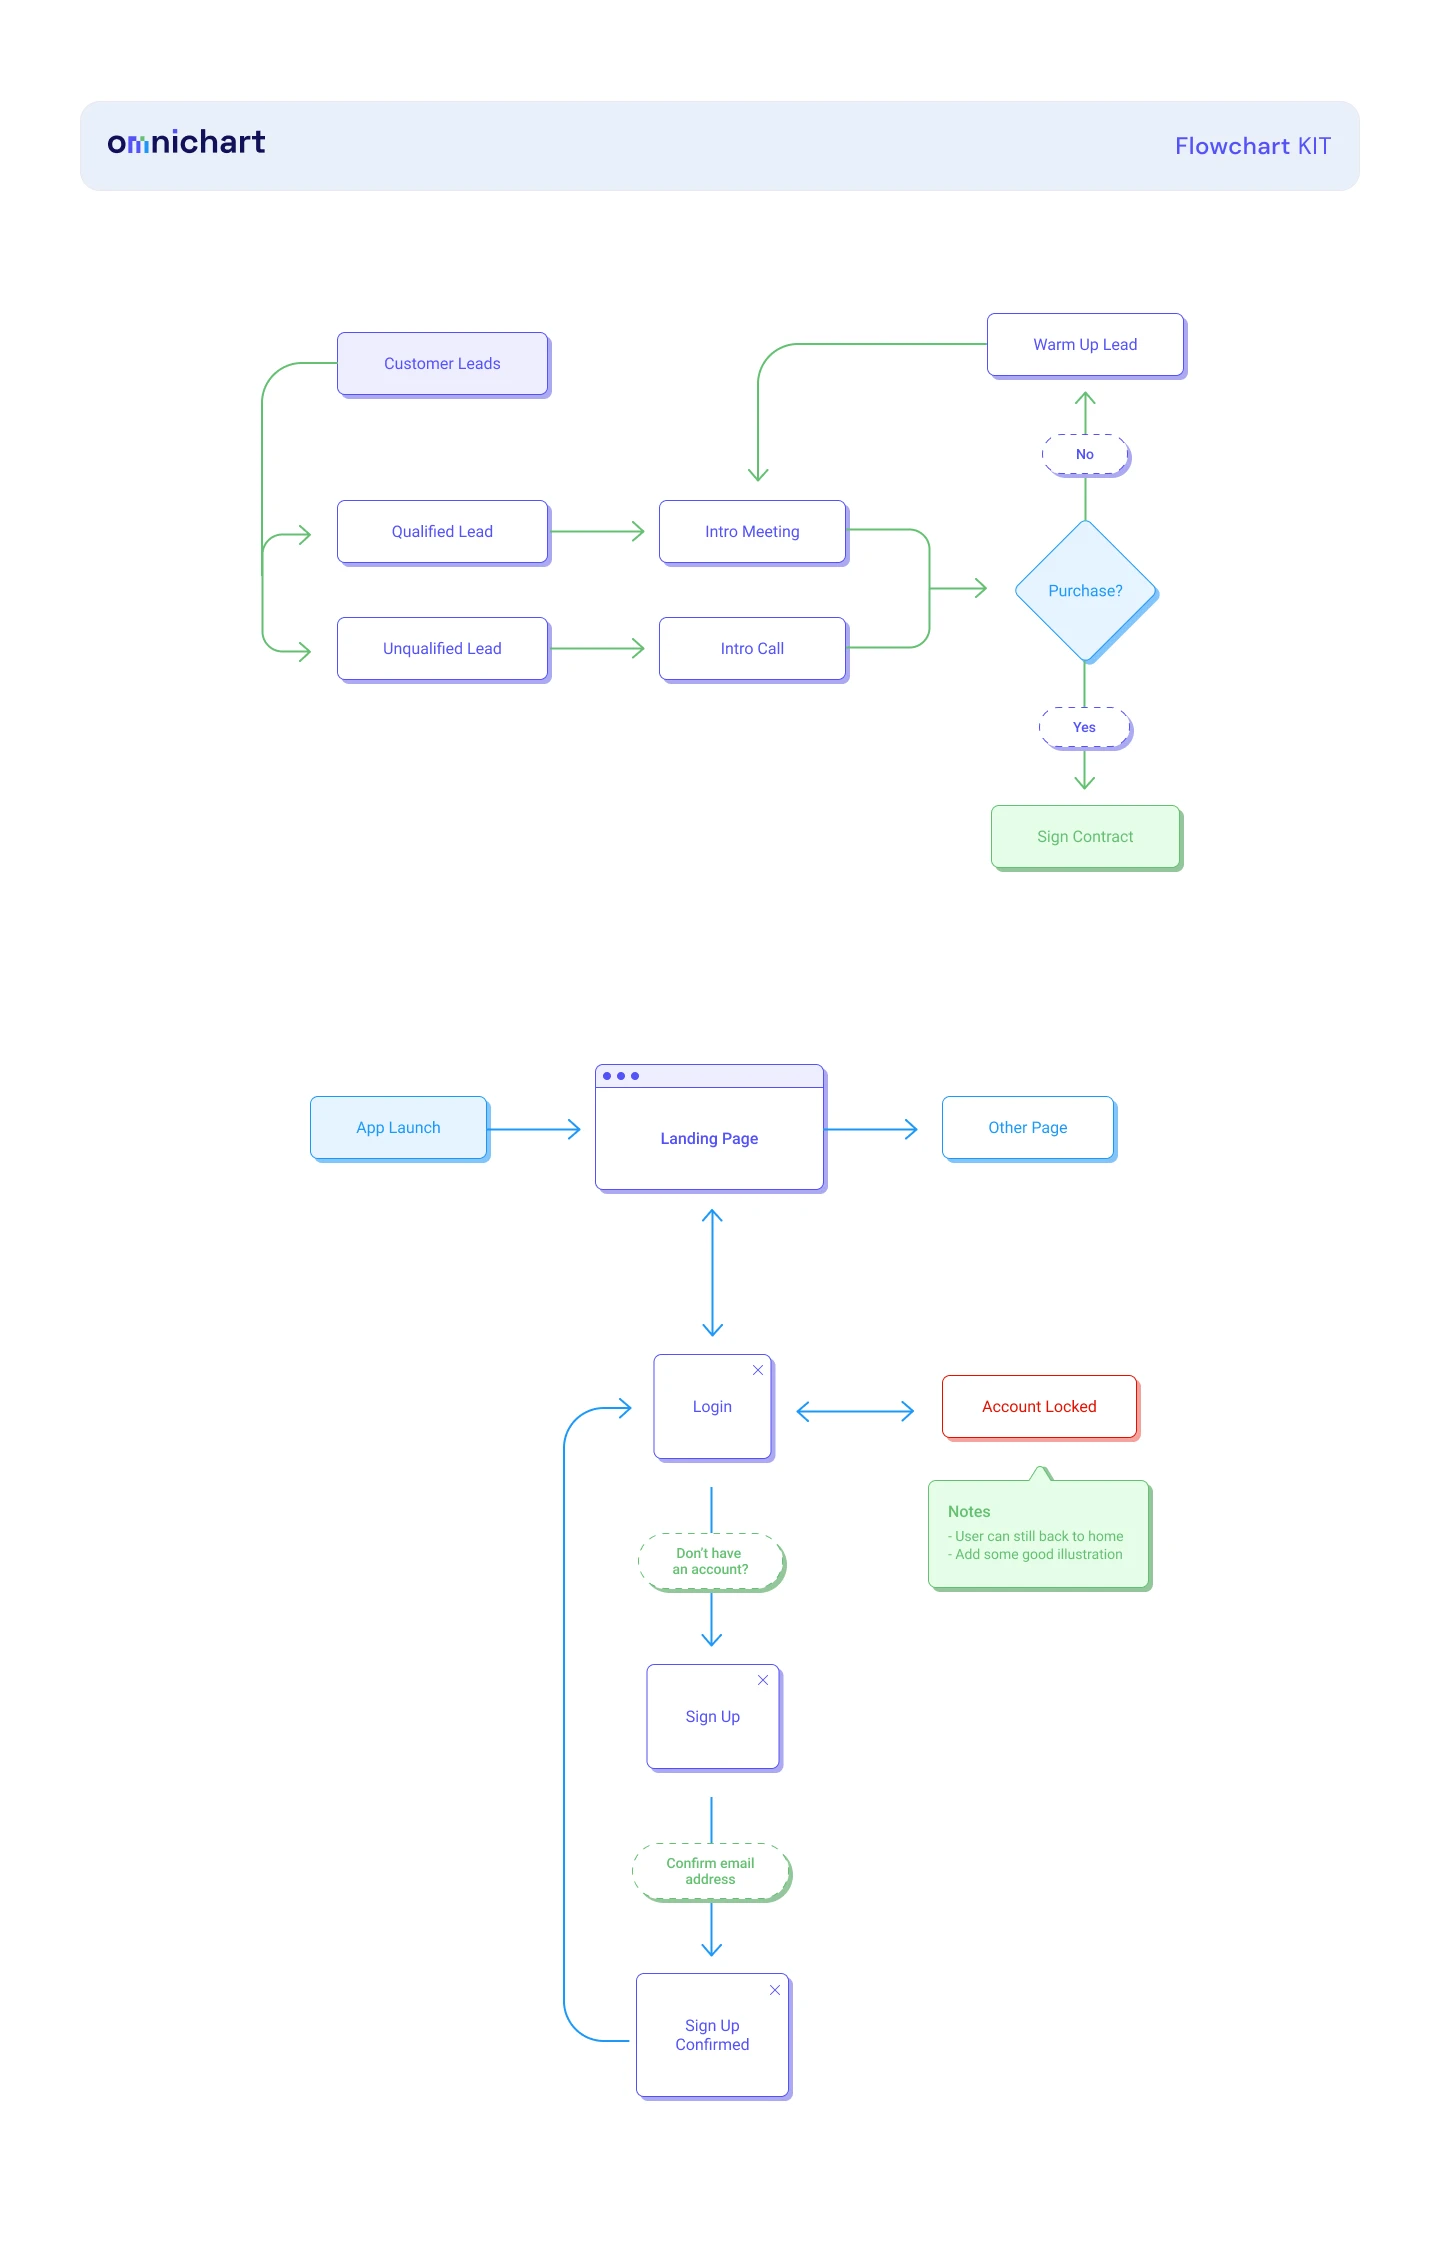 Omnichart - Free UX Flow Chart for Figma - We make a customizabe UX Flow Chart. Every part separated as component, you can edit, change,  or use for your purposes. Feel free to use!